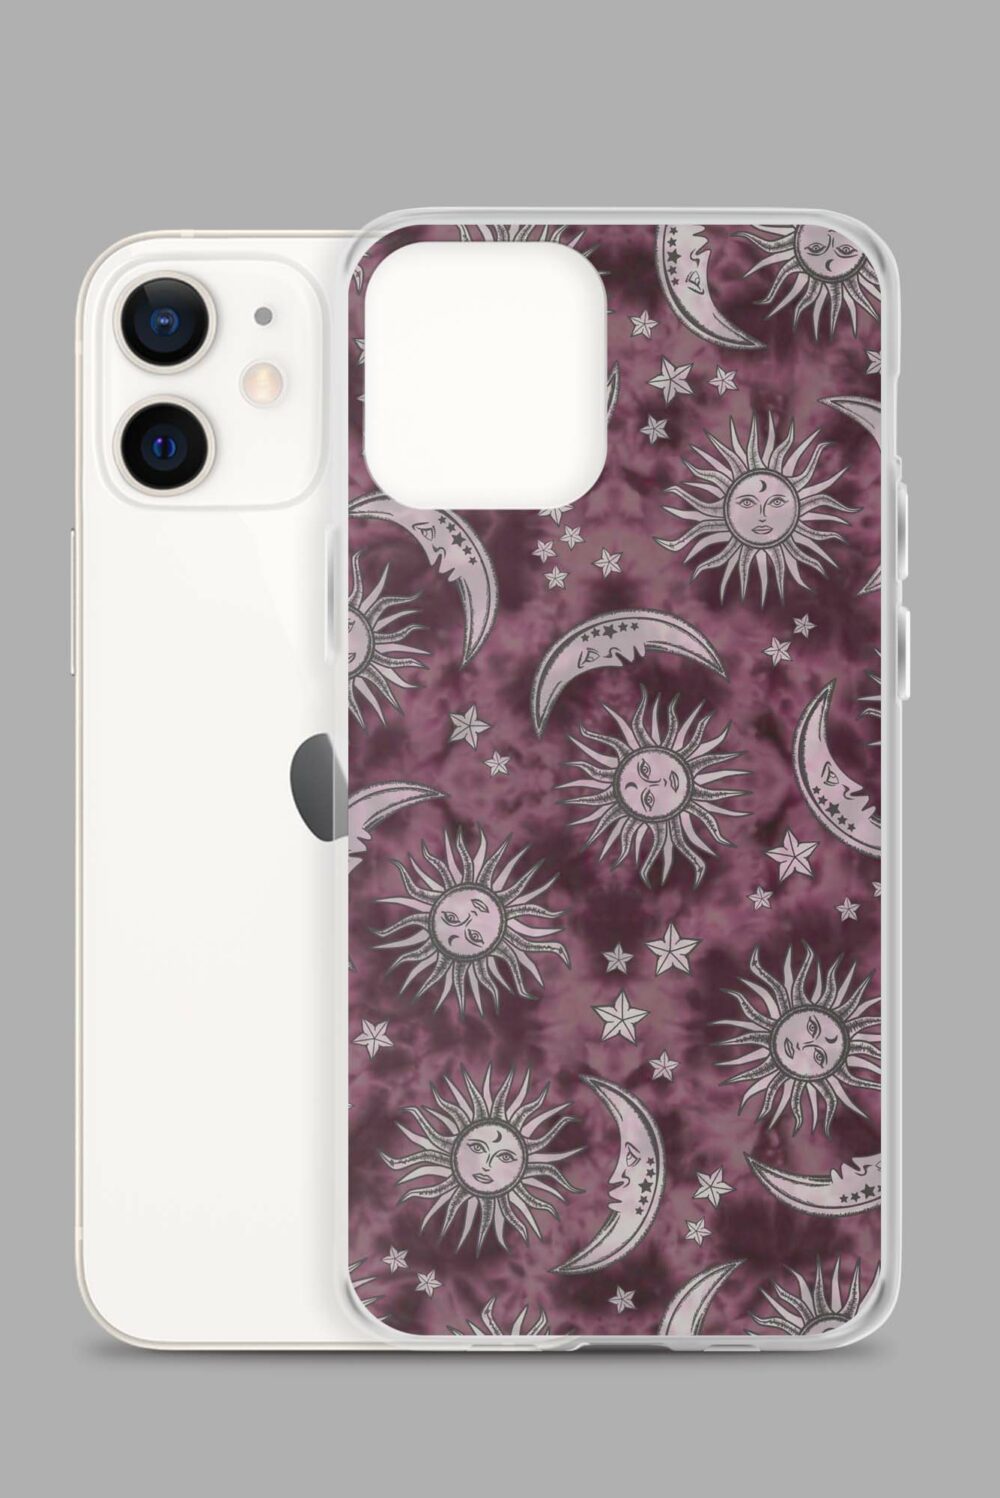 pink suns moons clear case for iphone iphone 12 case with phone 64e26619498a5